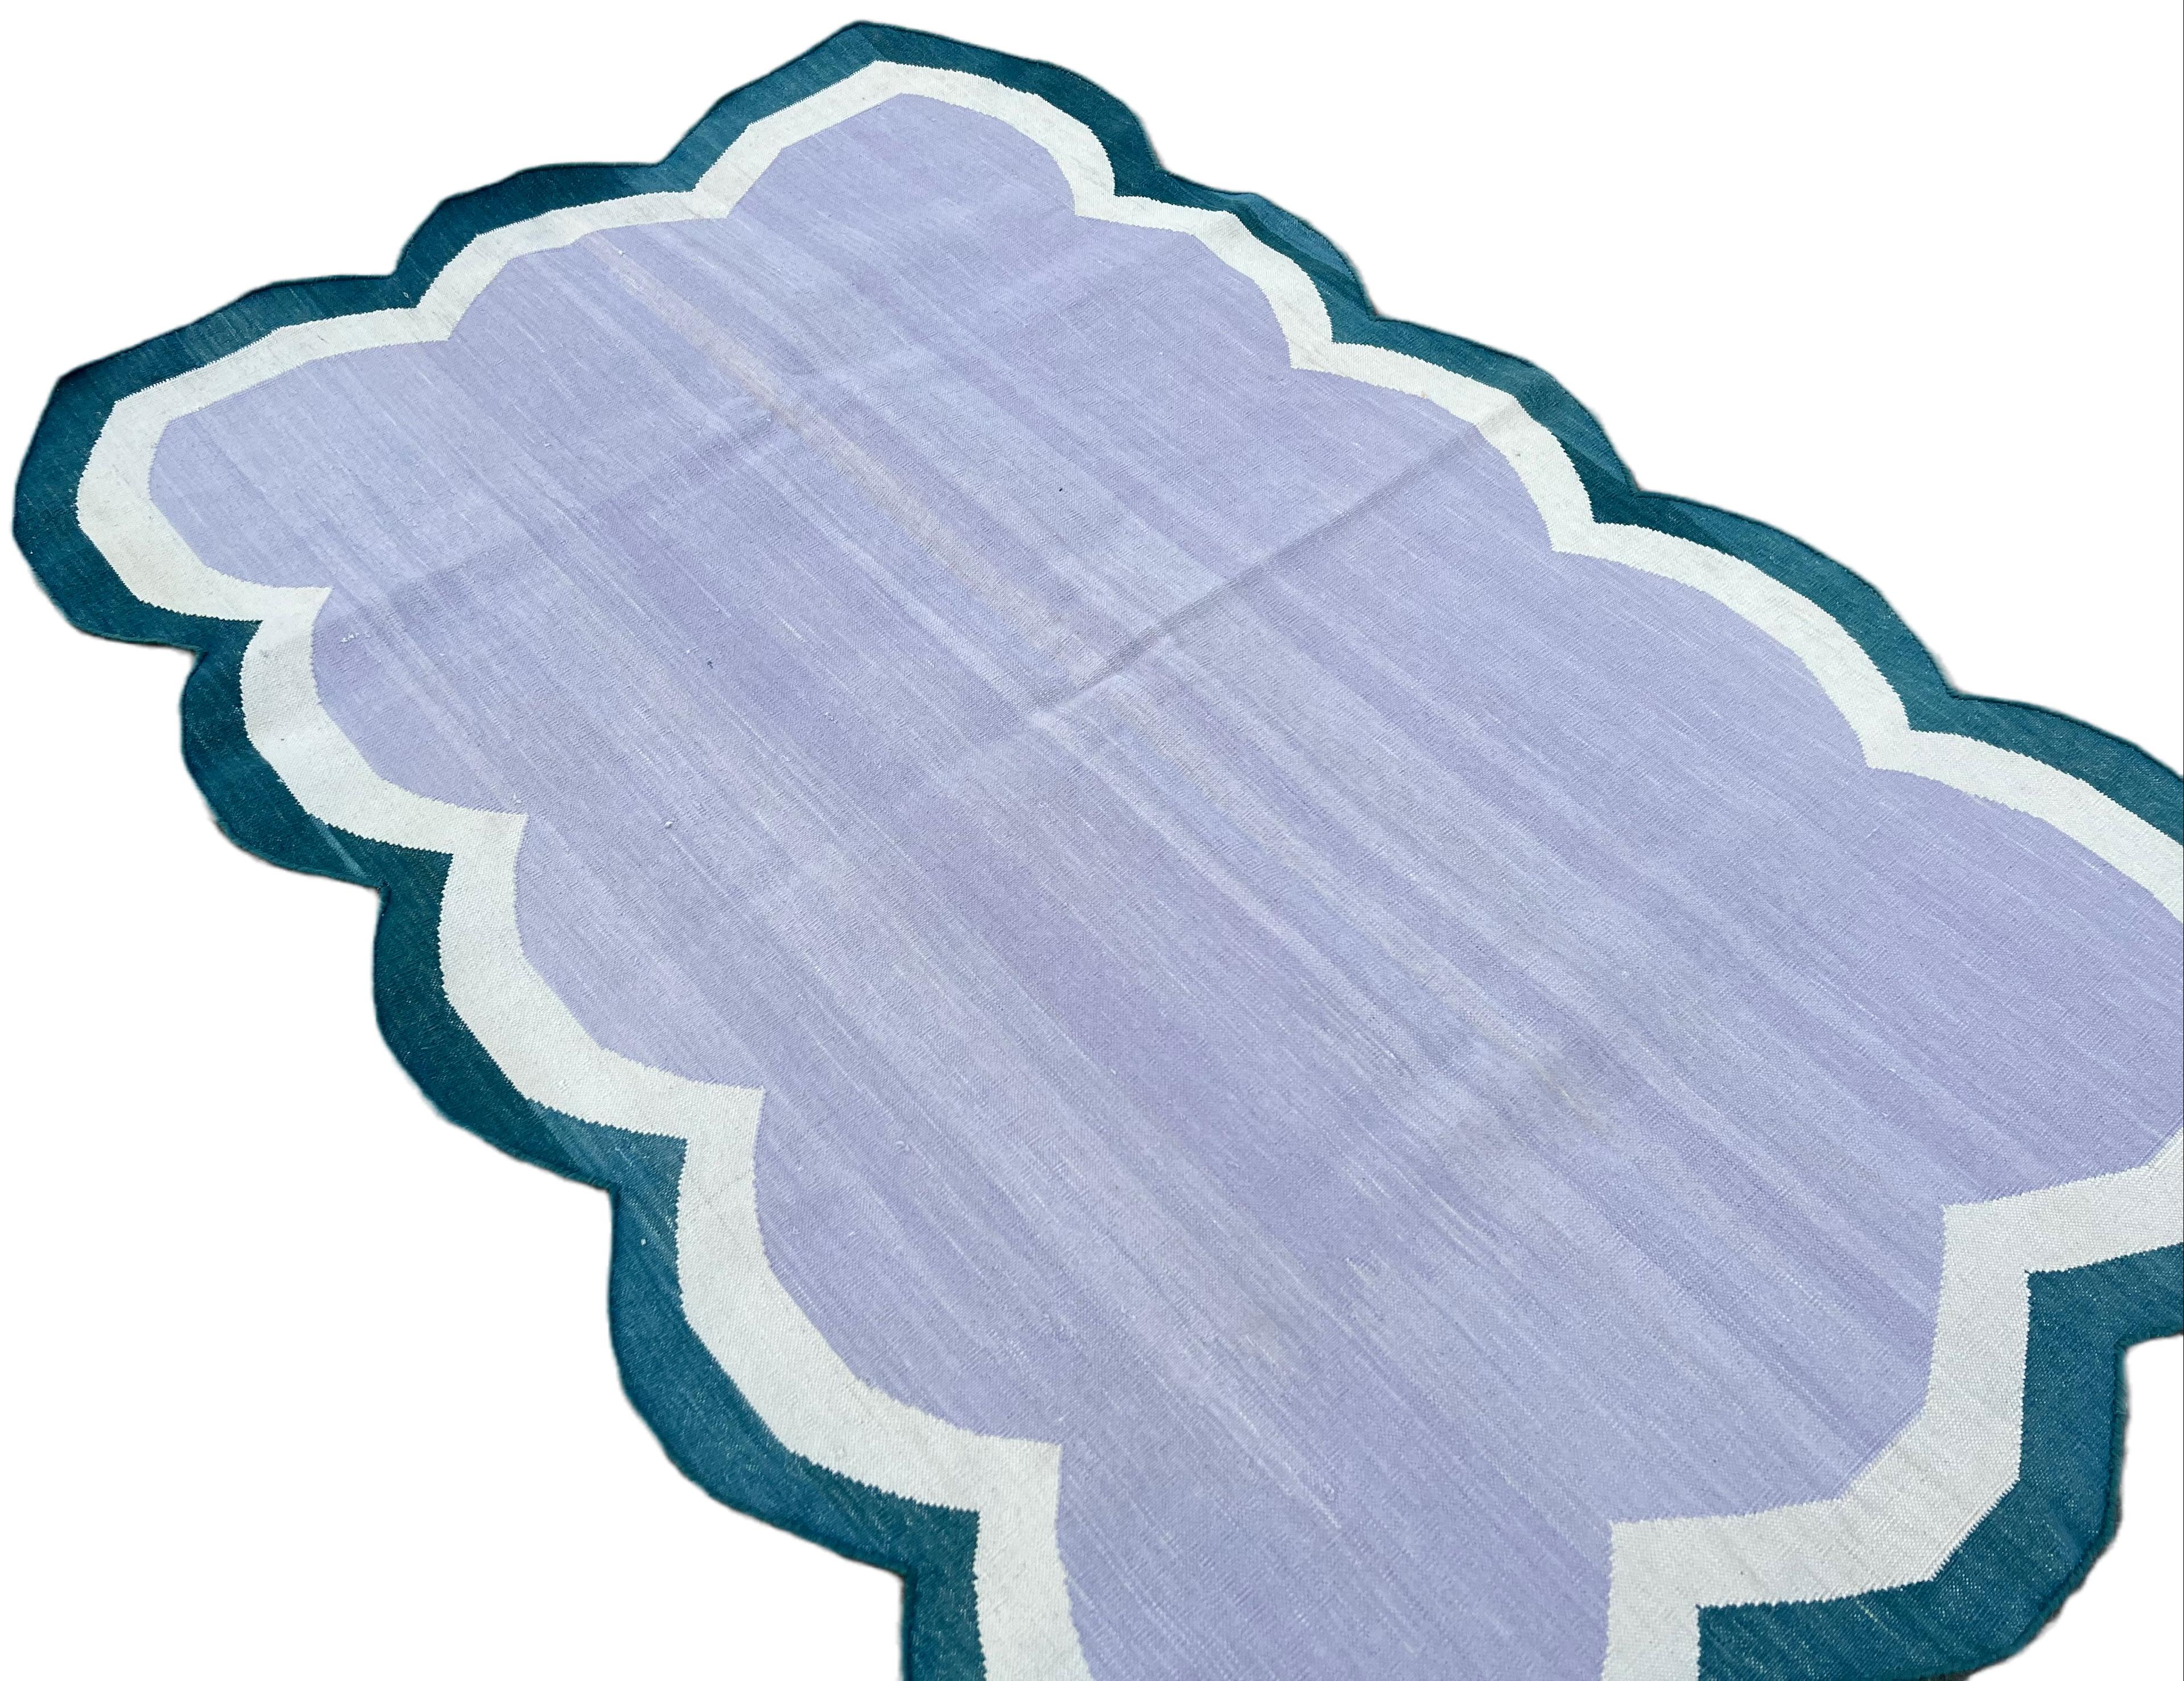 Contemporary Handmade Cotton Area Flat Weave Rug, 3x5 Lavender And Blue Scallop Kilim Dhurrie For Sale